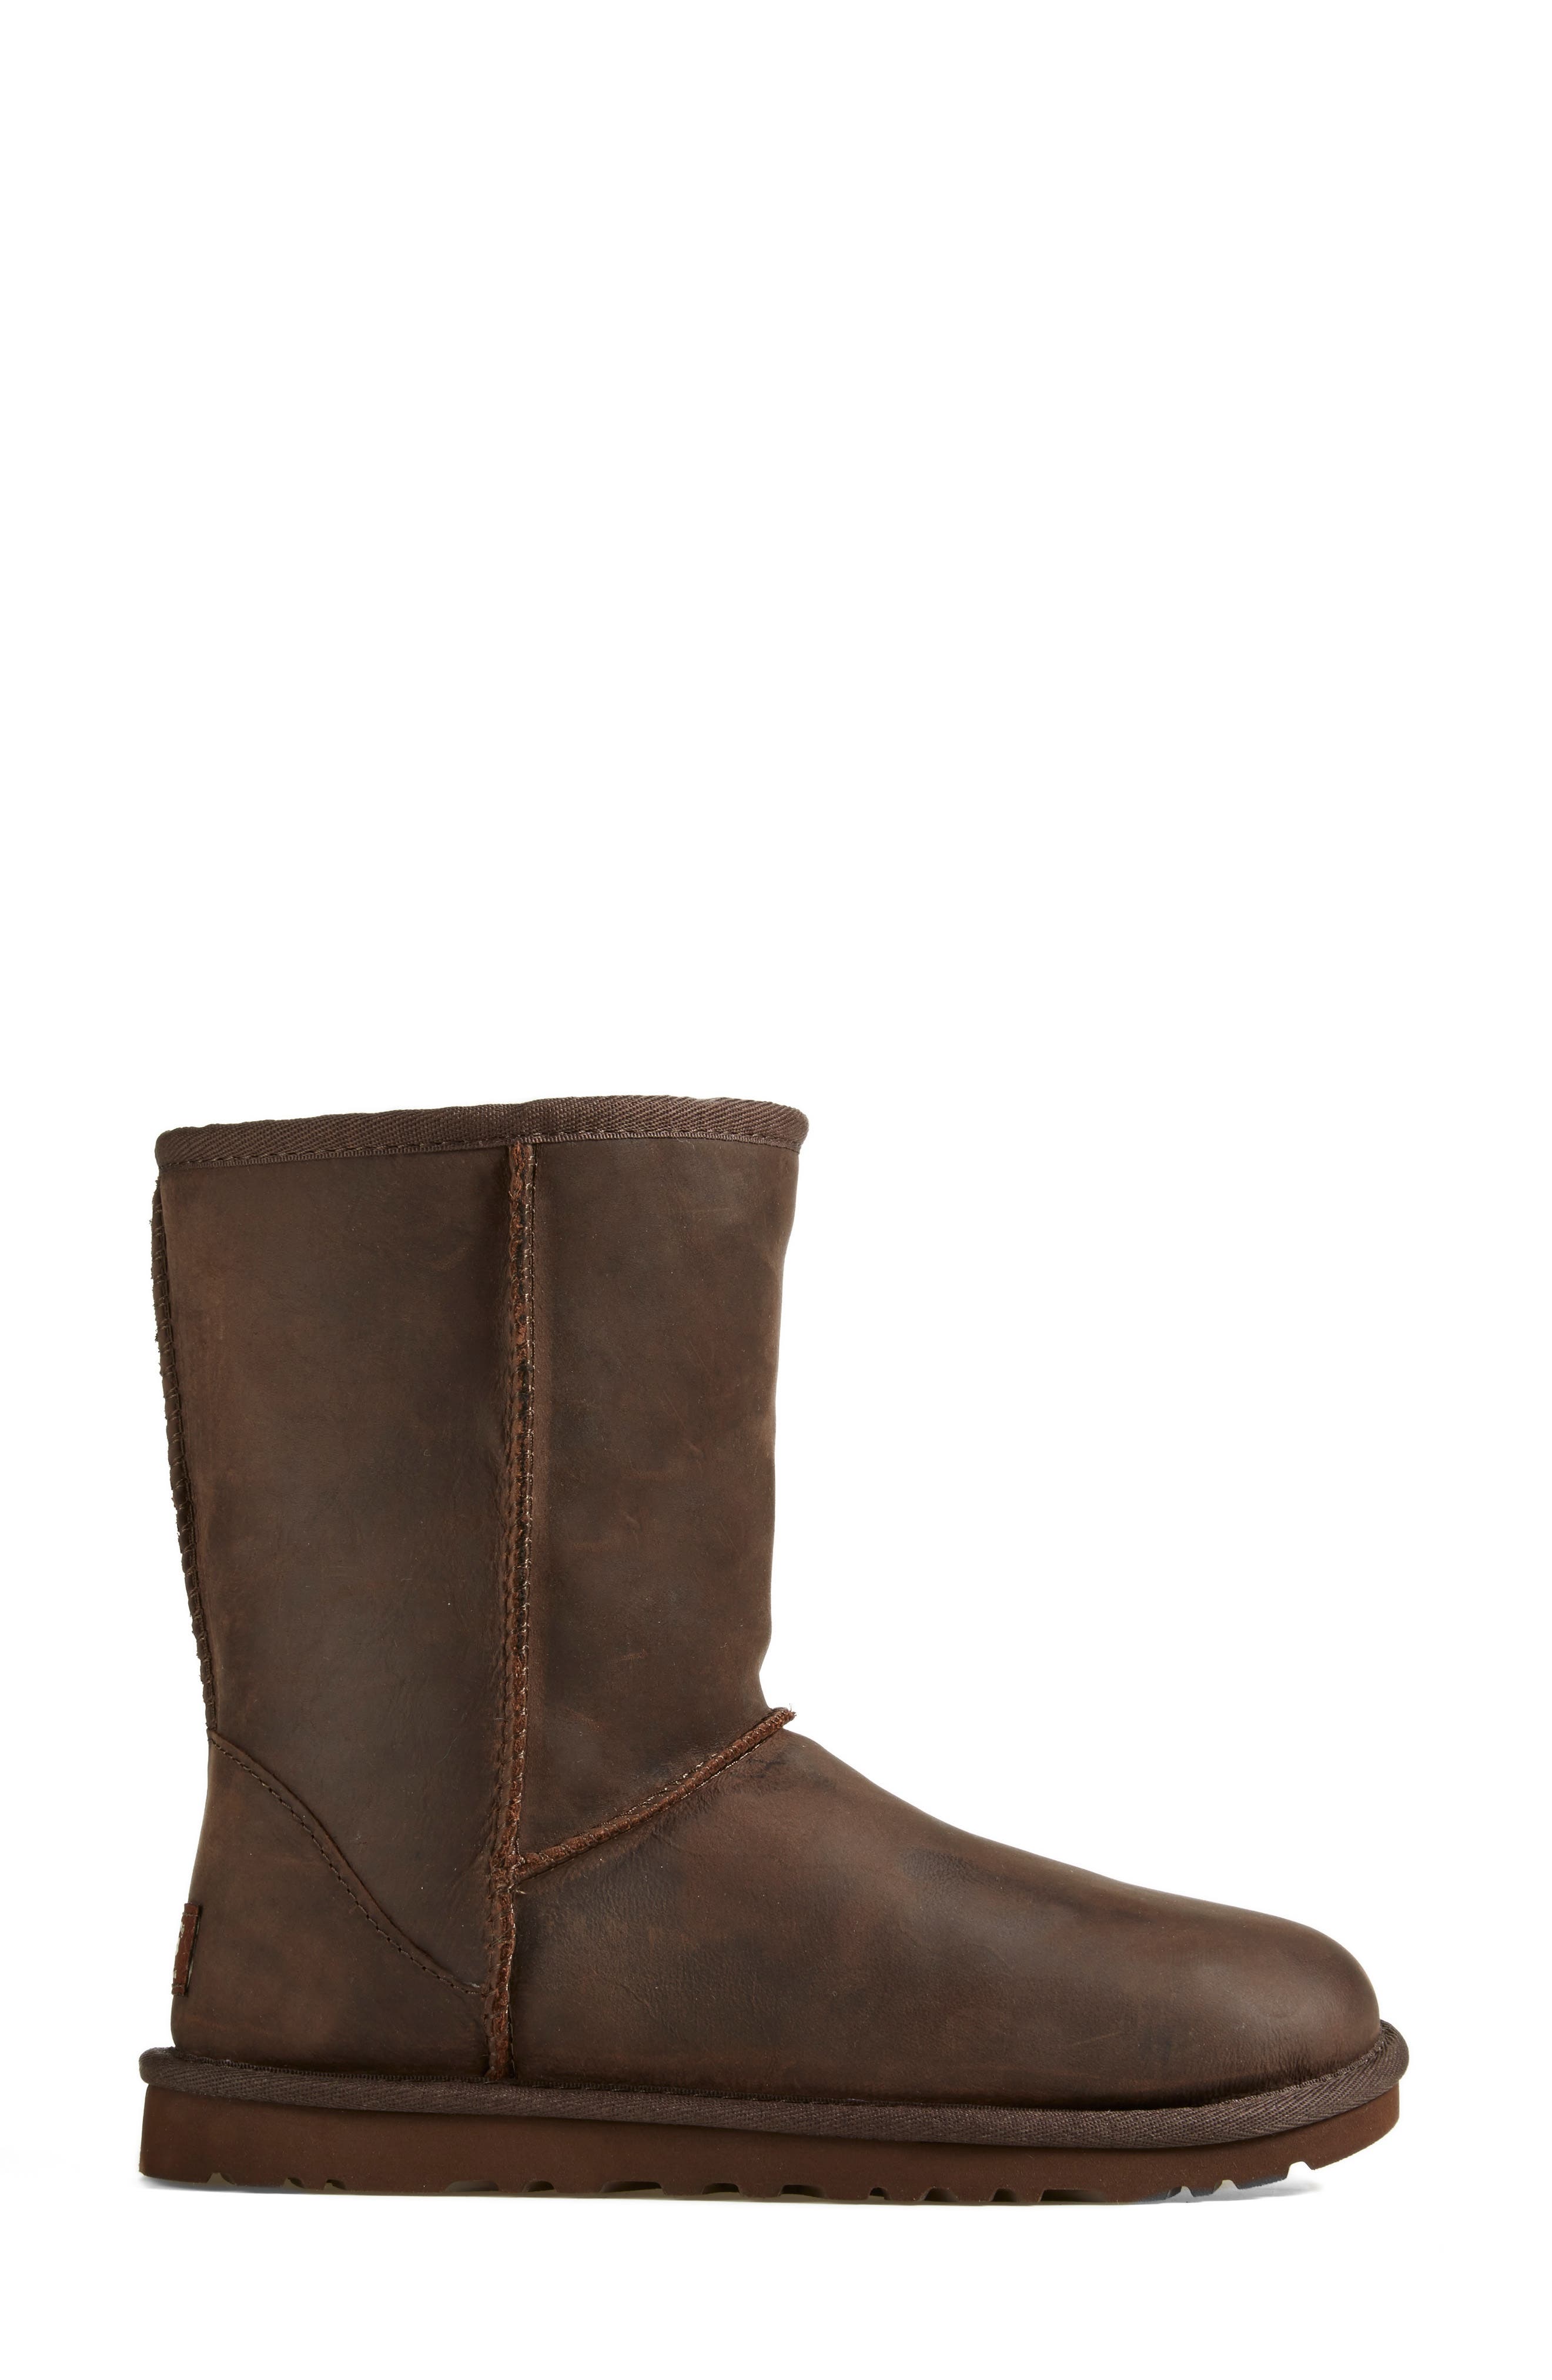 brown leather classic uggs 